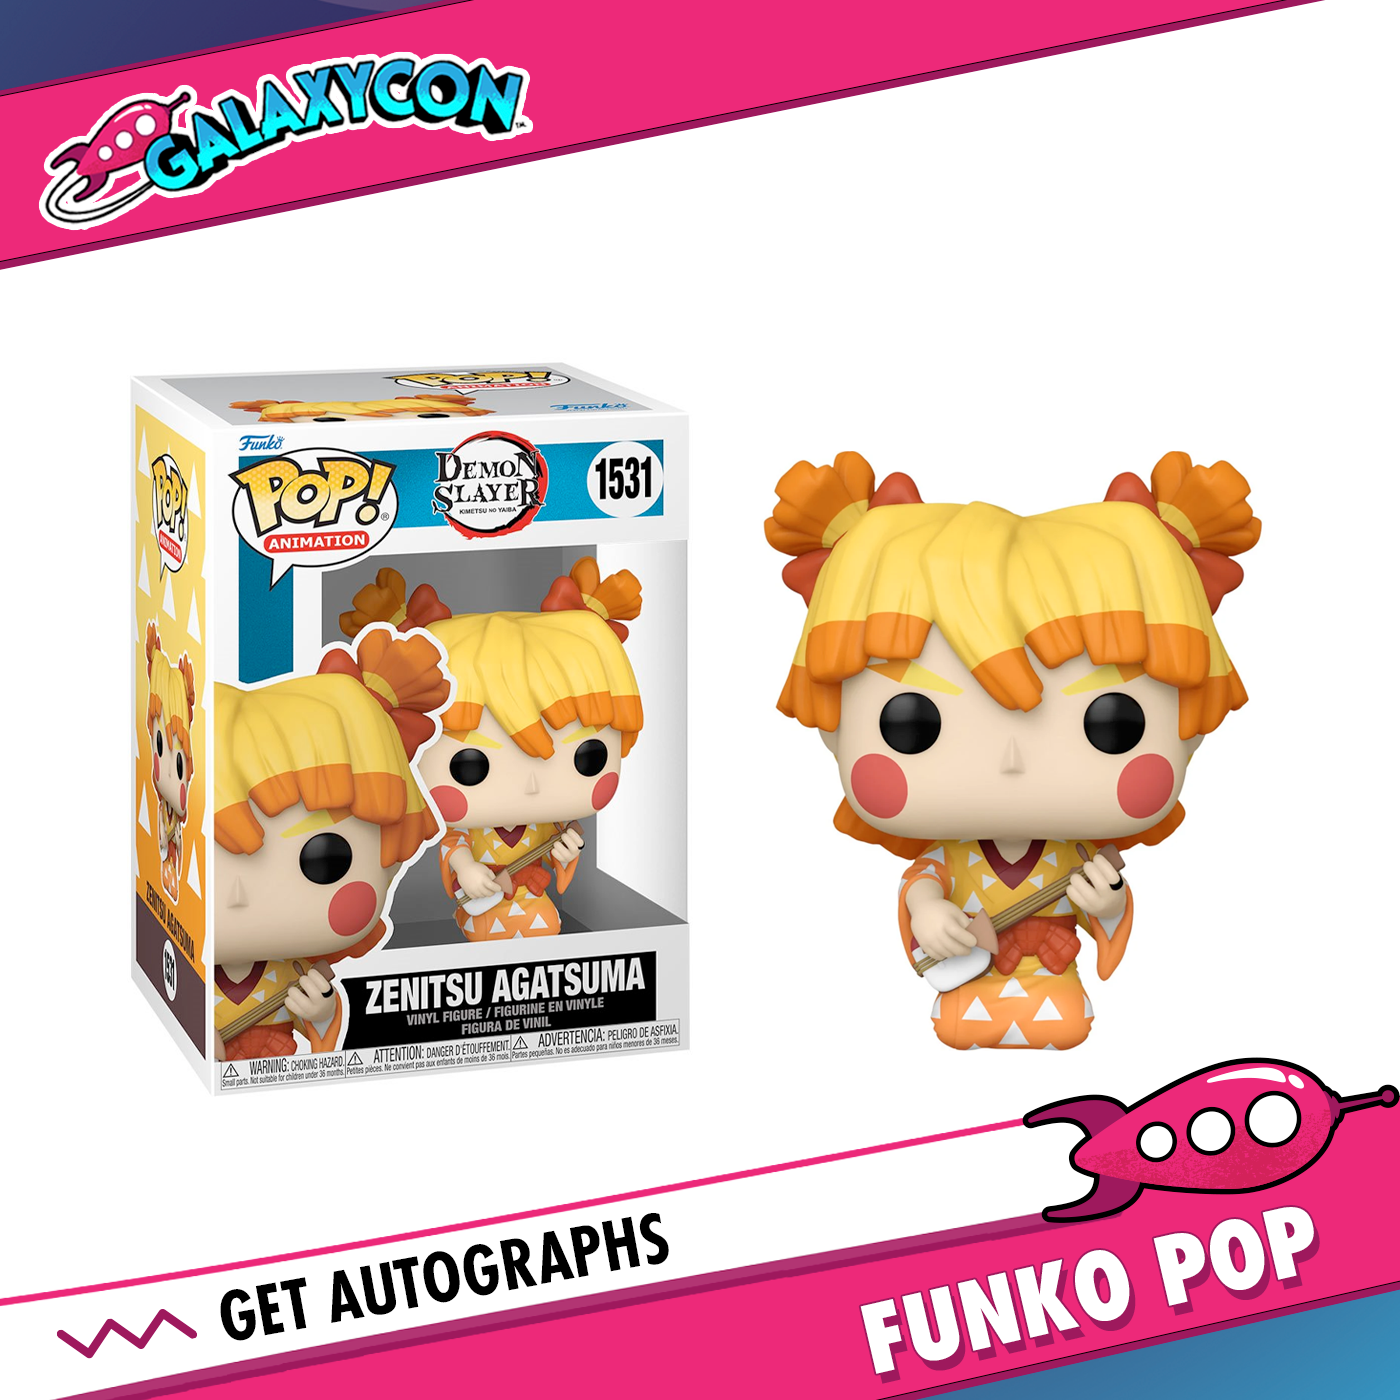 Aleks Le: Autograph Signing on a Funko Pop, July 4th